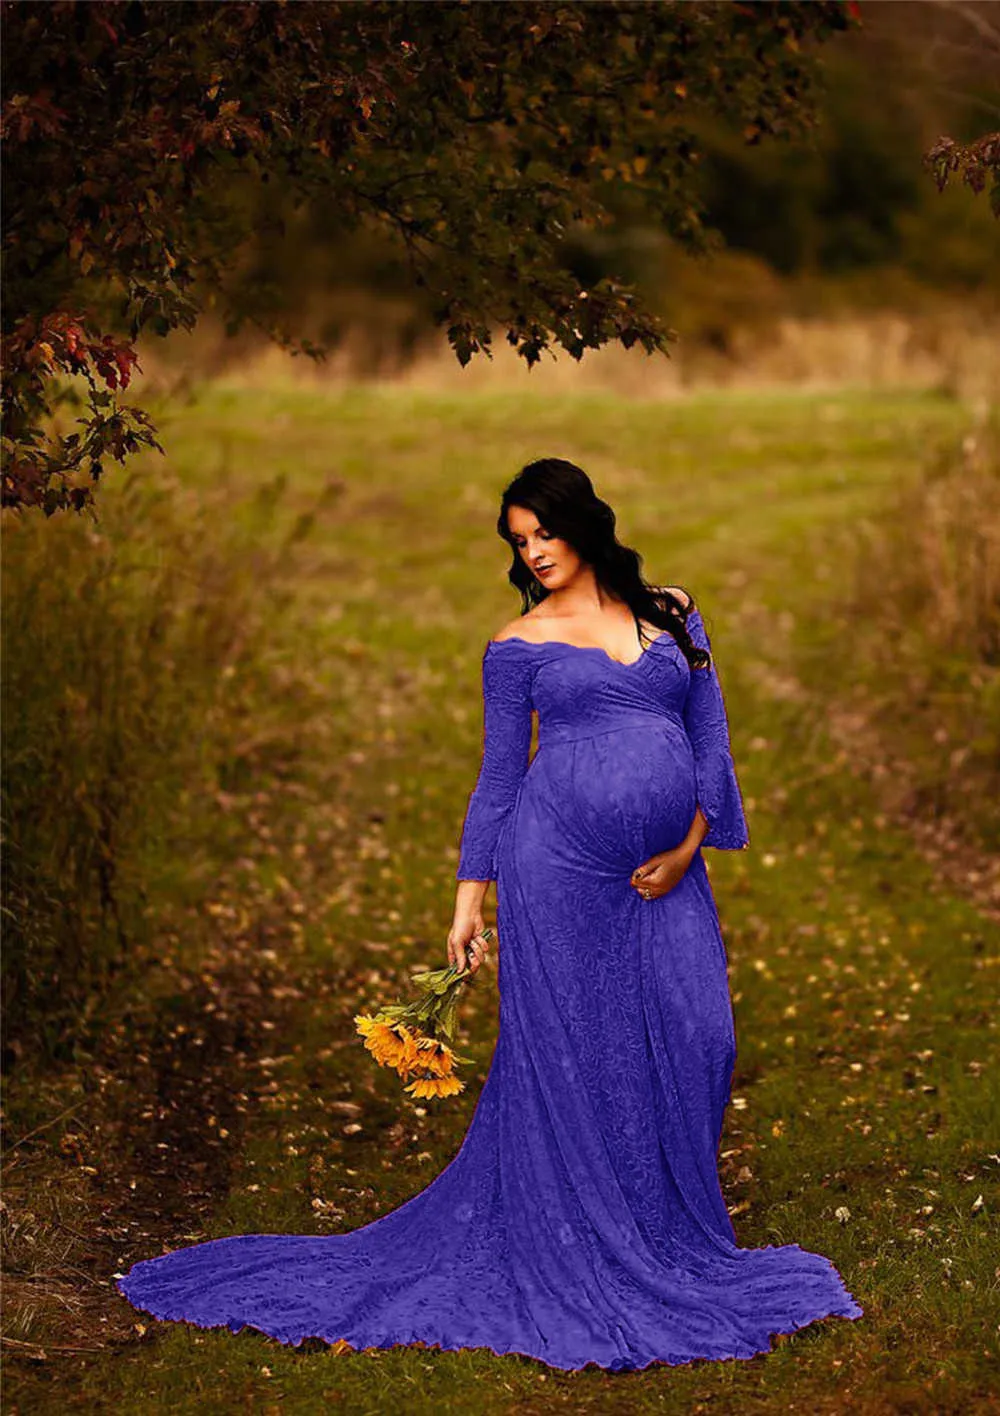 Long Maternity Dresses For Photo Shoot Sexy Lace Fancy Pregnancy Dresses Flare Sleeve Pregnant Women Maxi Gown Photography Props (16)